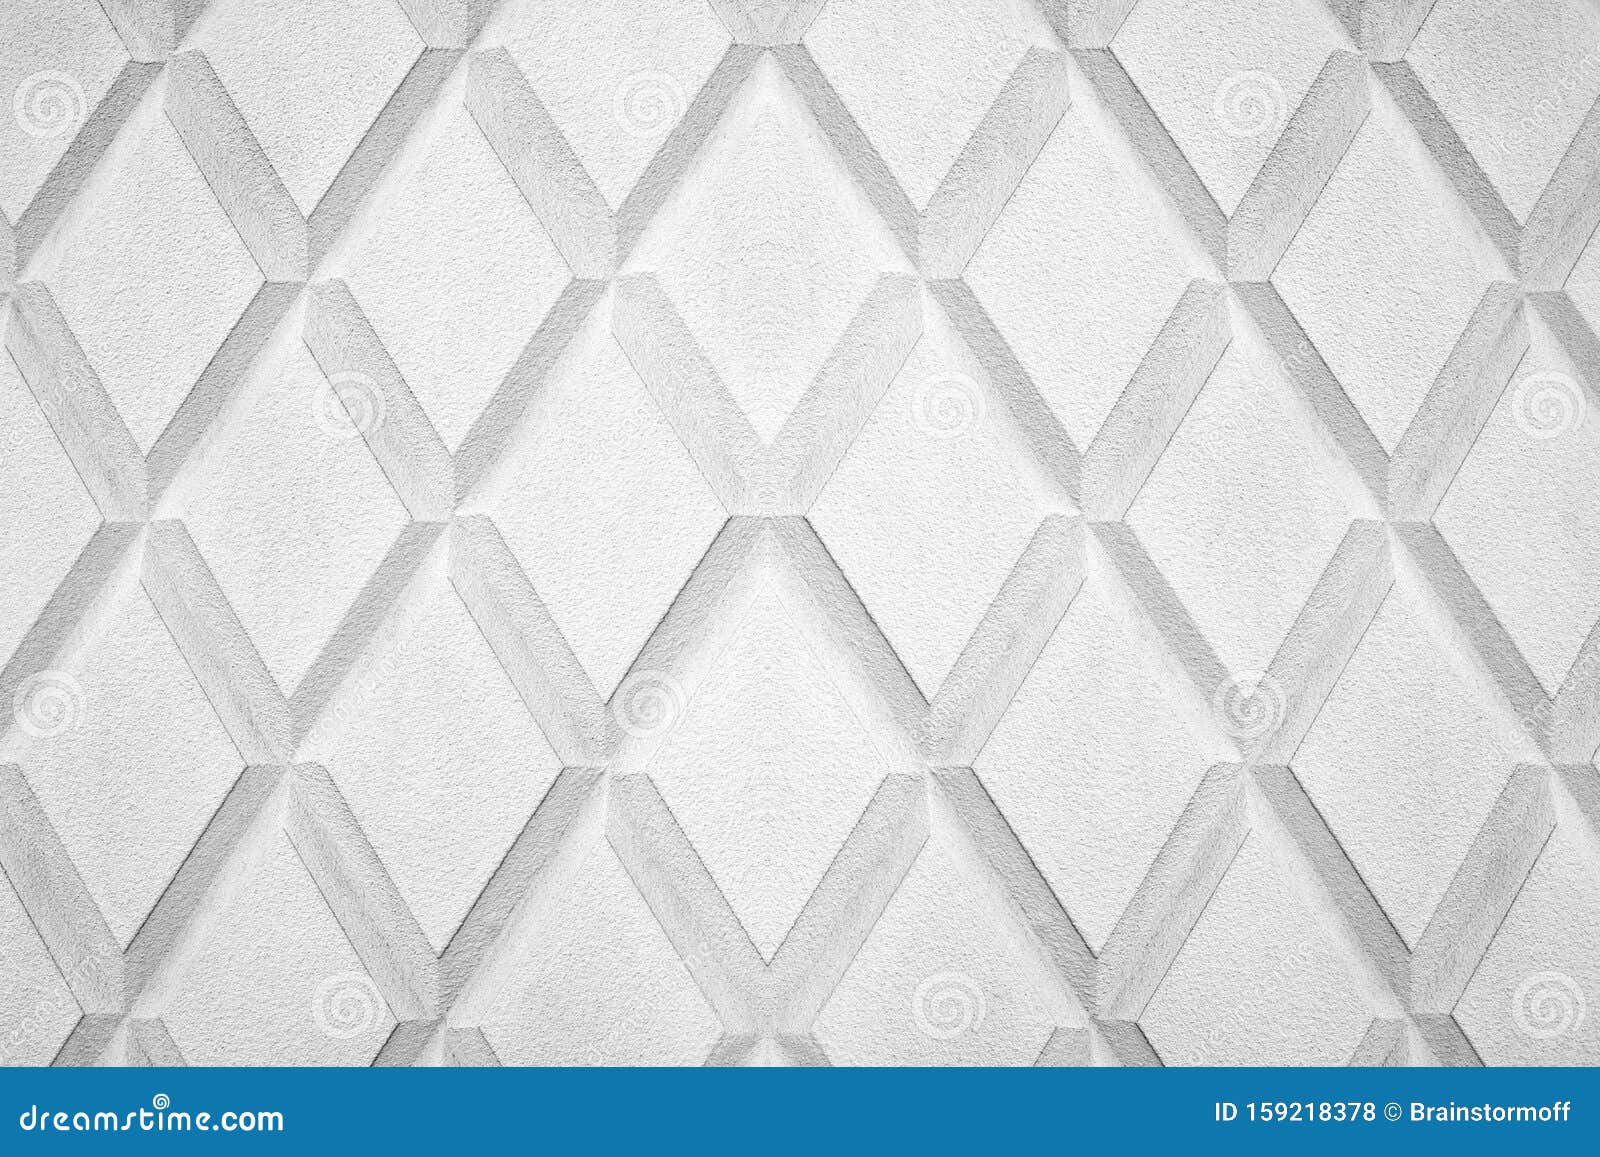 Abstract Rhombus Shape White and Black Color Background Close Up, Gray ...